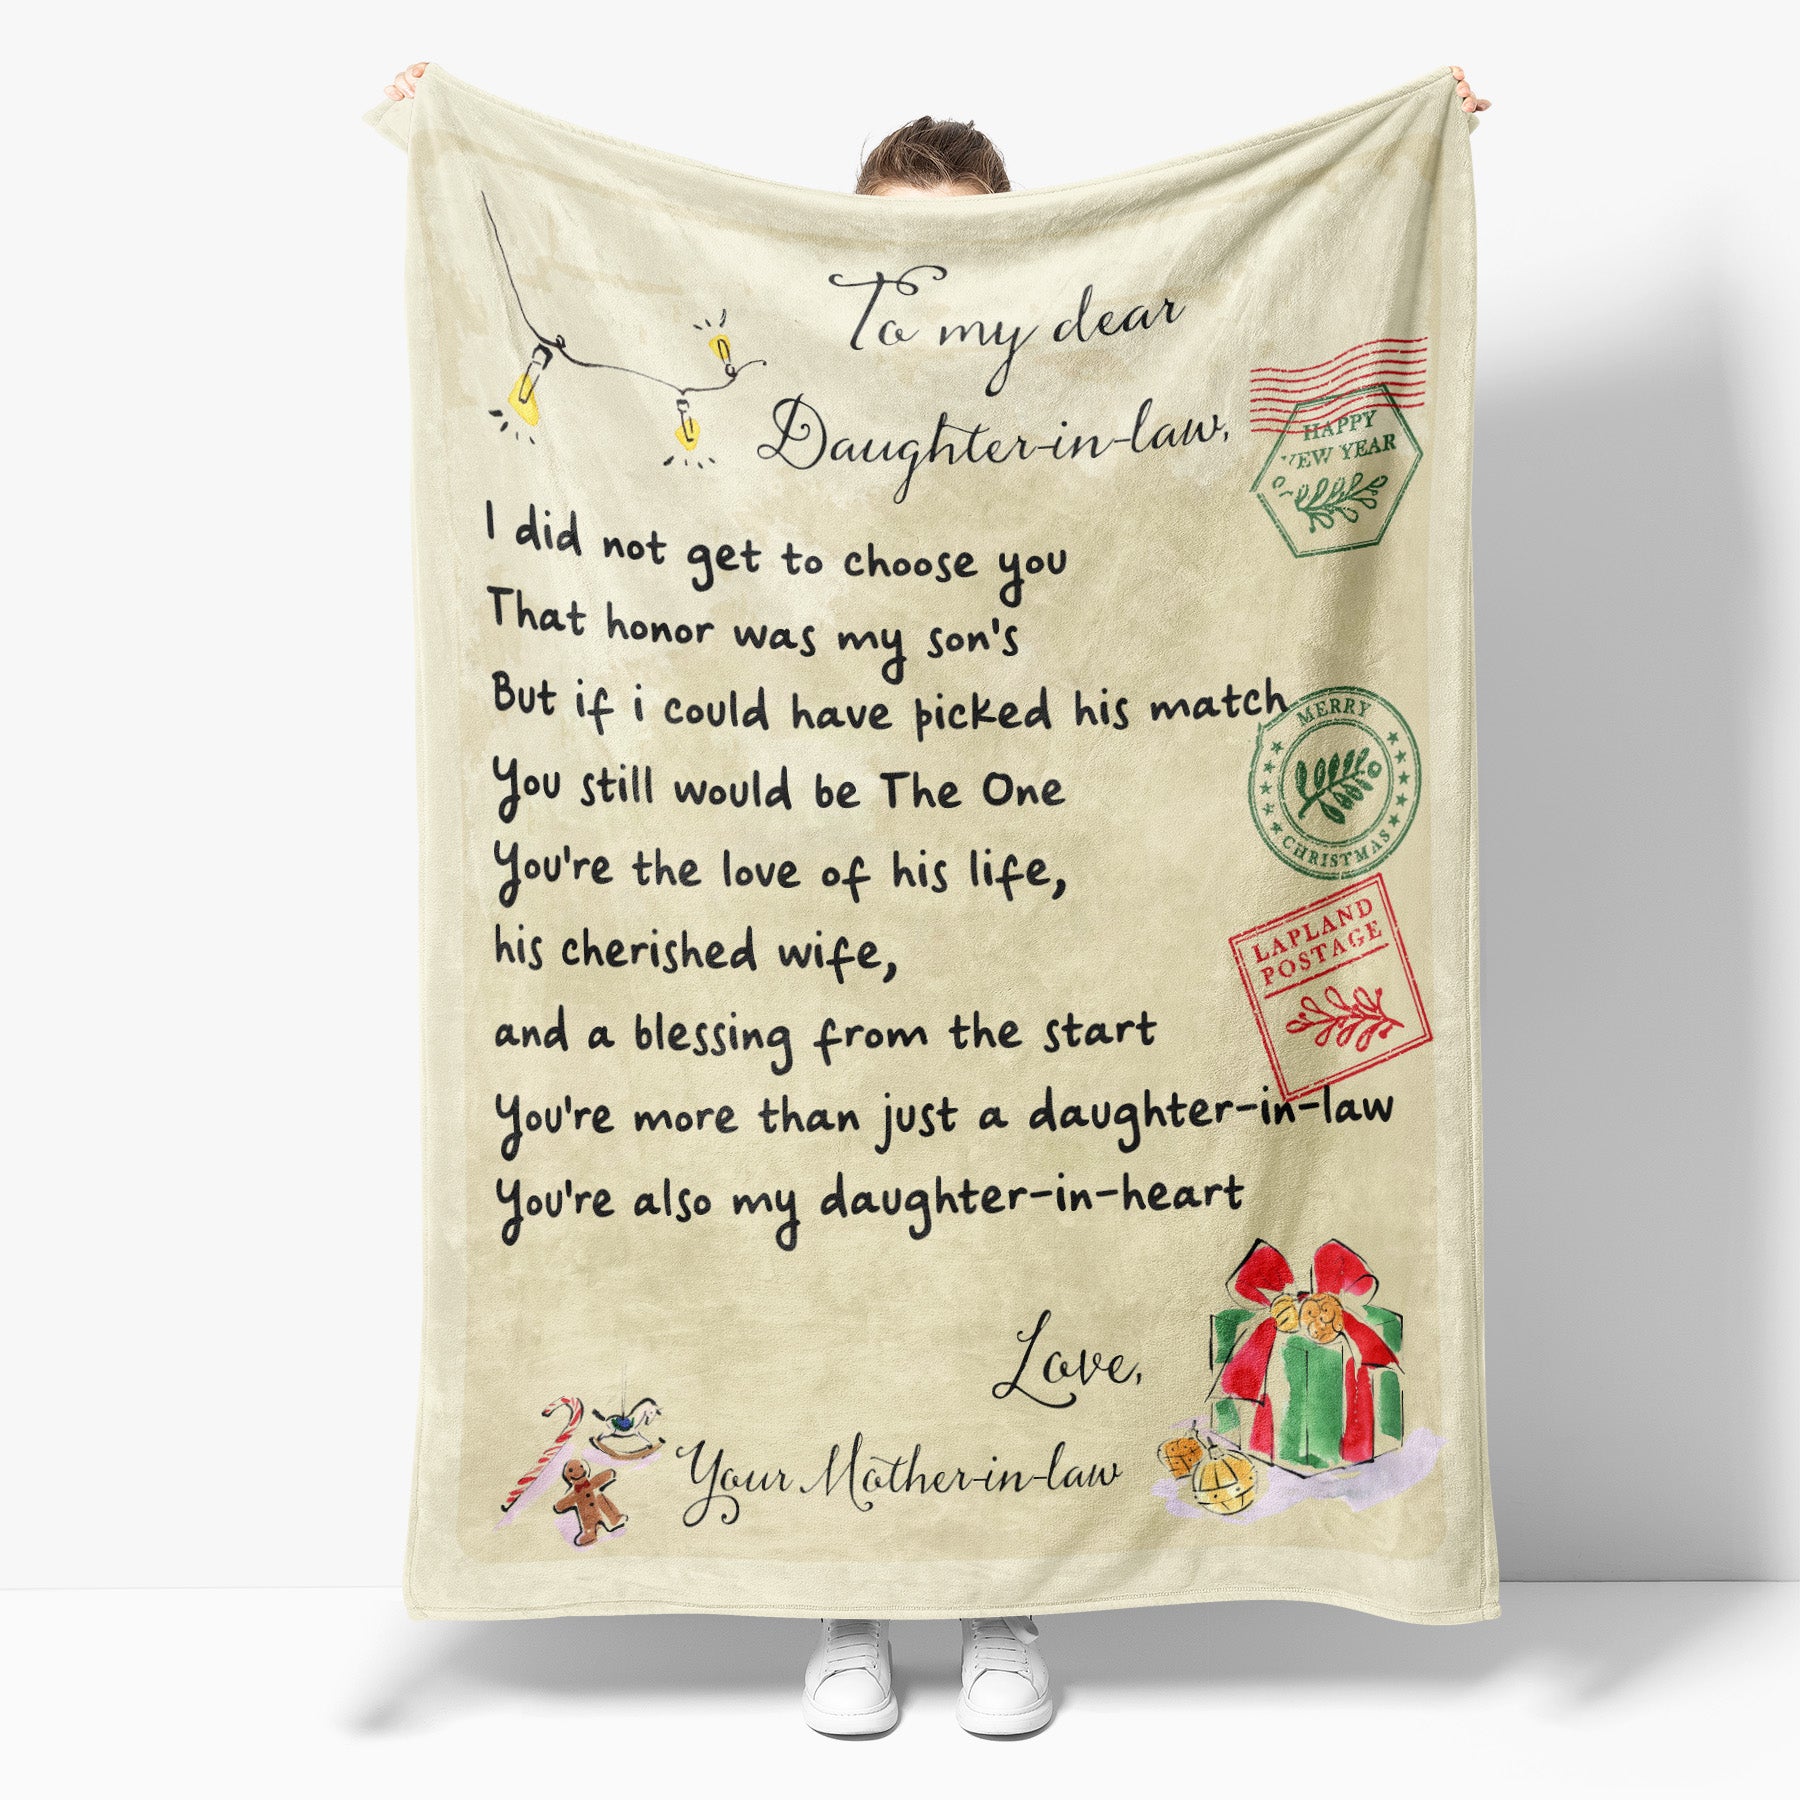 Christmas Blanket Gift Ideas for Daughter in Law, You be The One